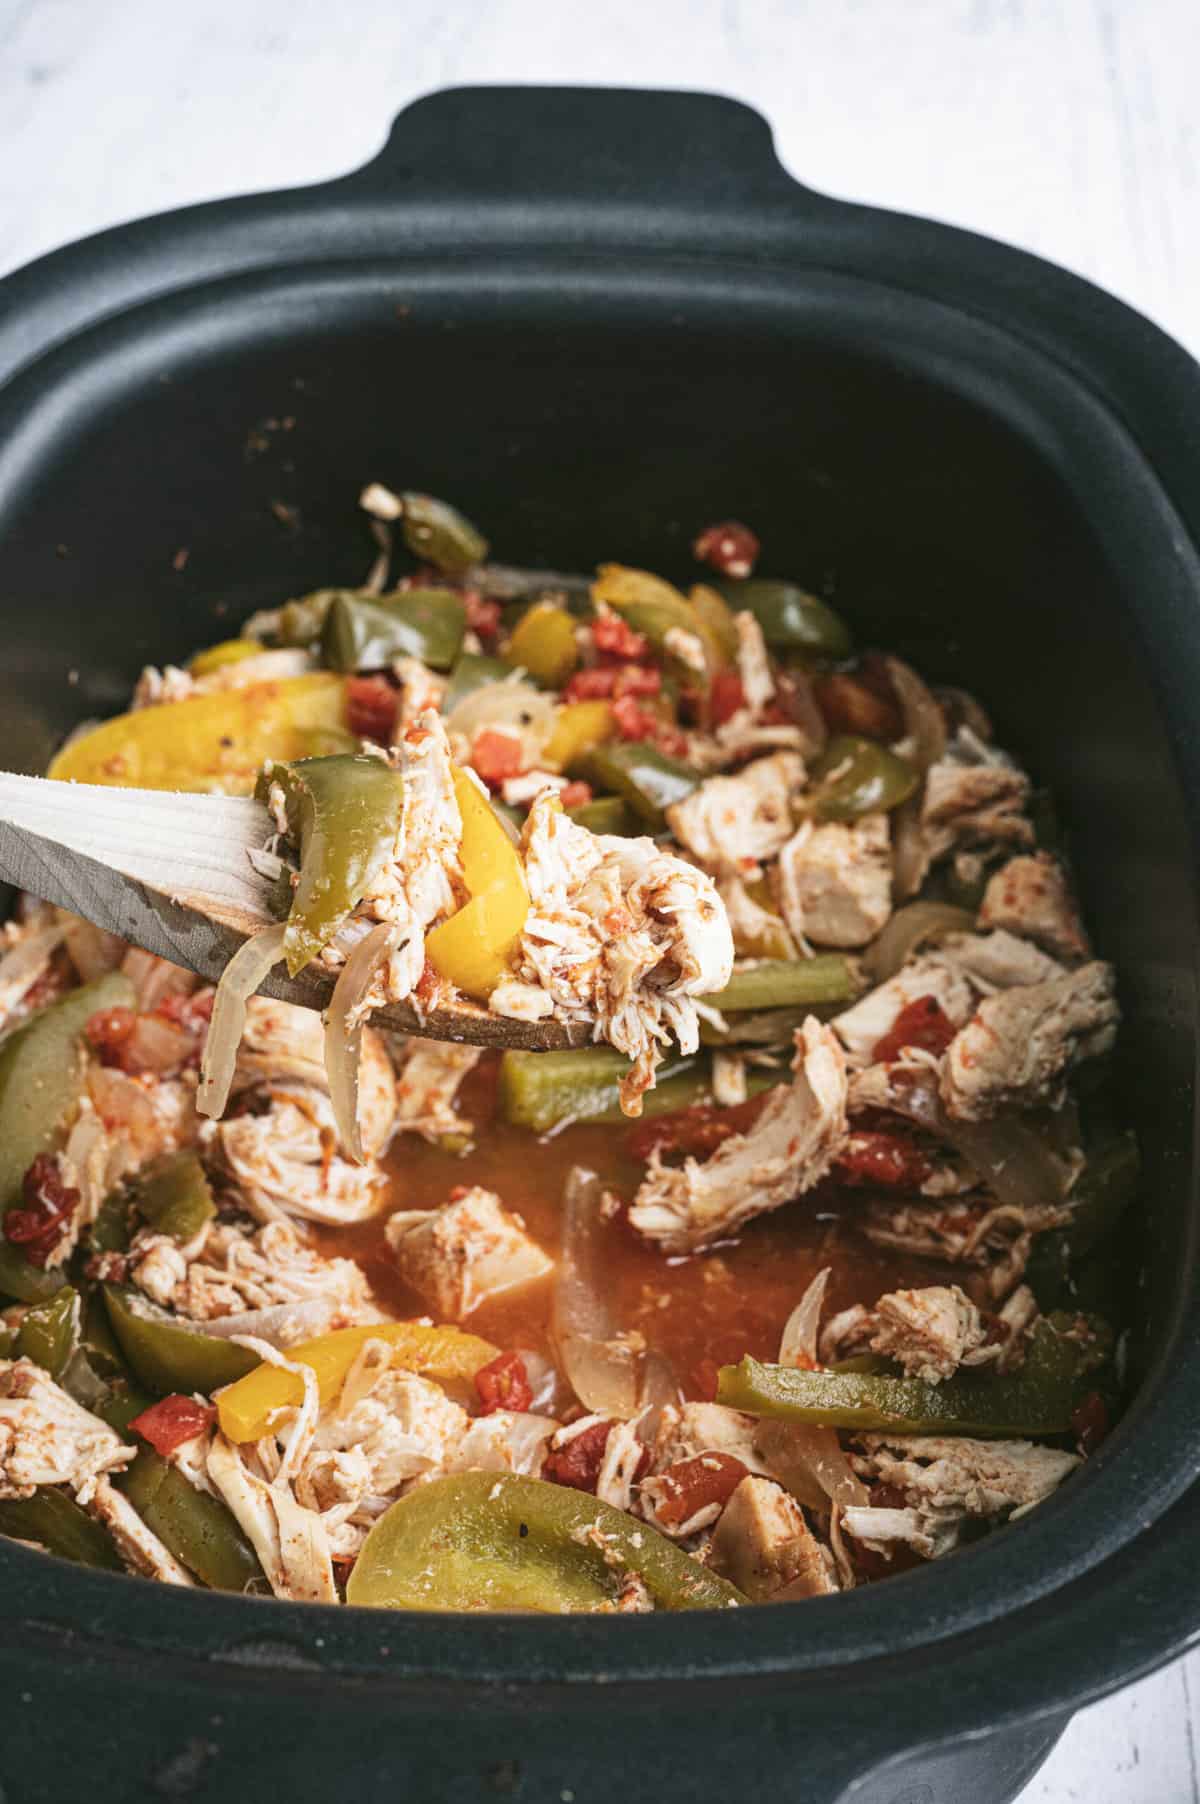 An oval shaped black slow cooker with shredded chicken and fajita veggies with a wooden spoon scooping up a portion.